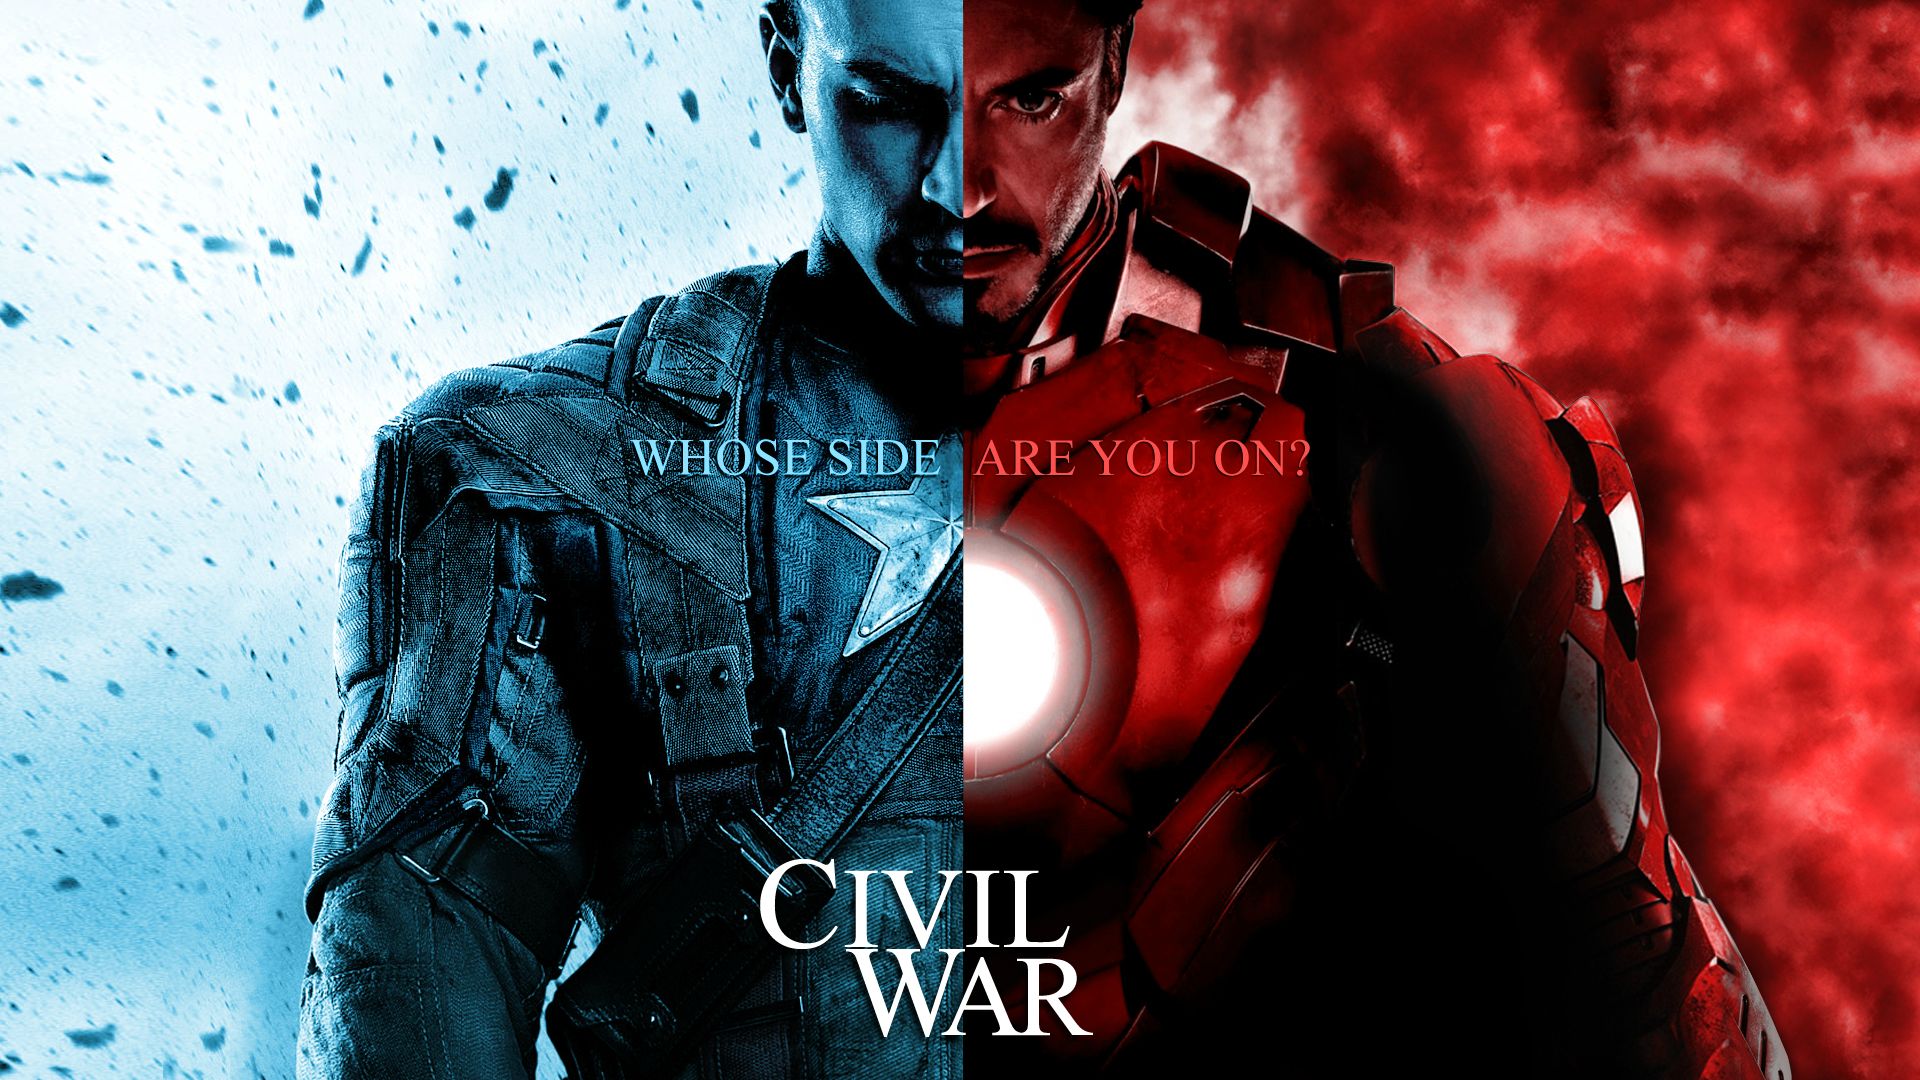 Captain America Civil War Whose side are you on